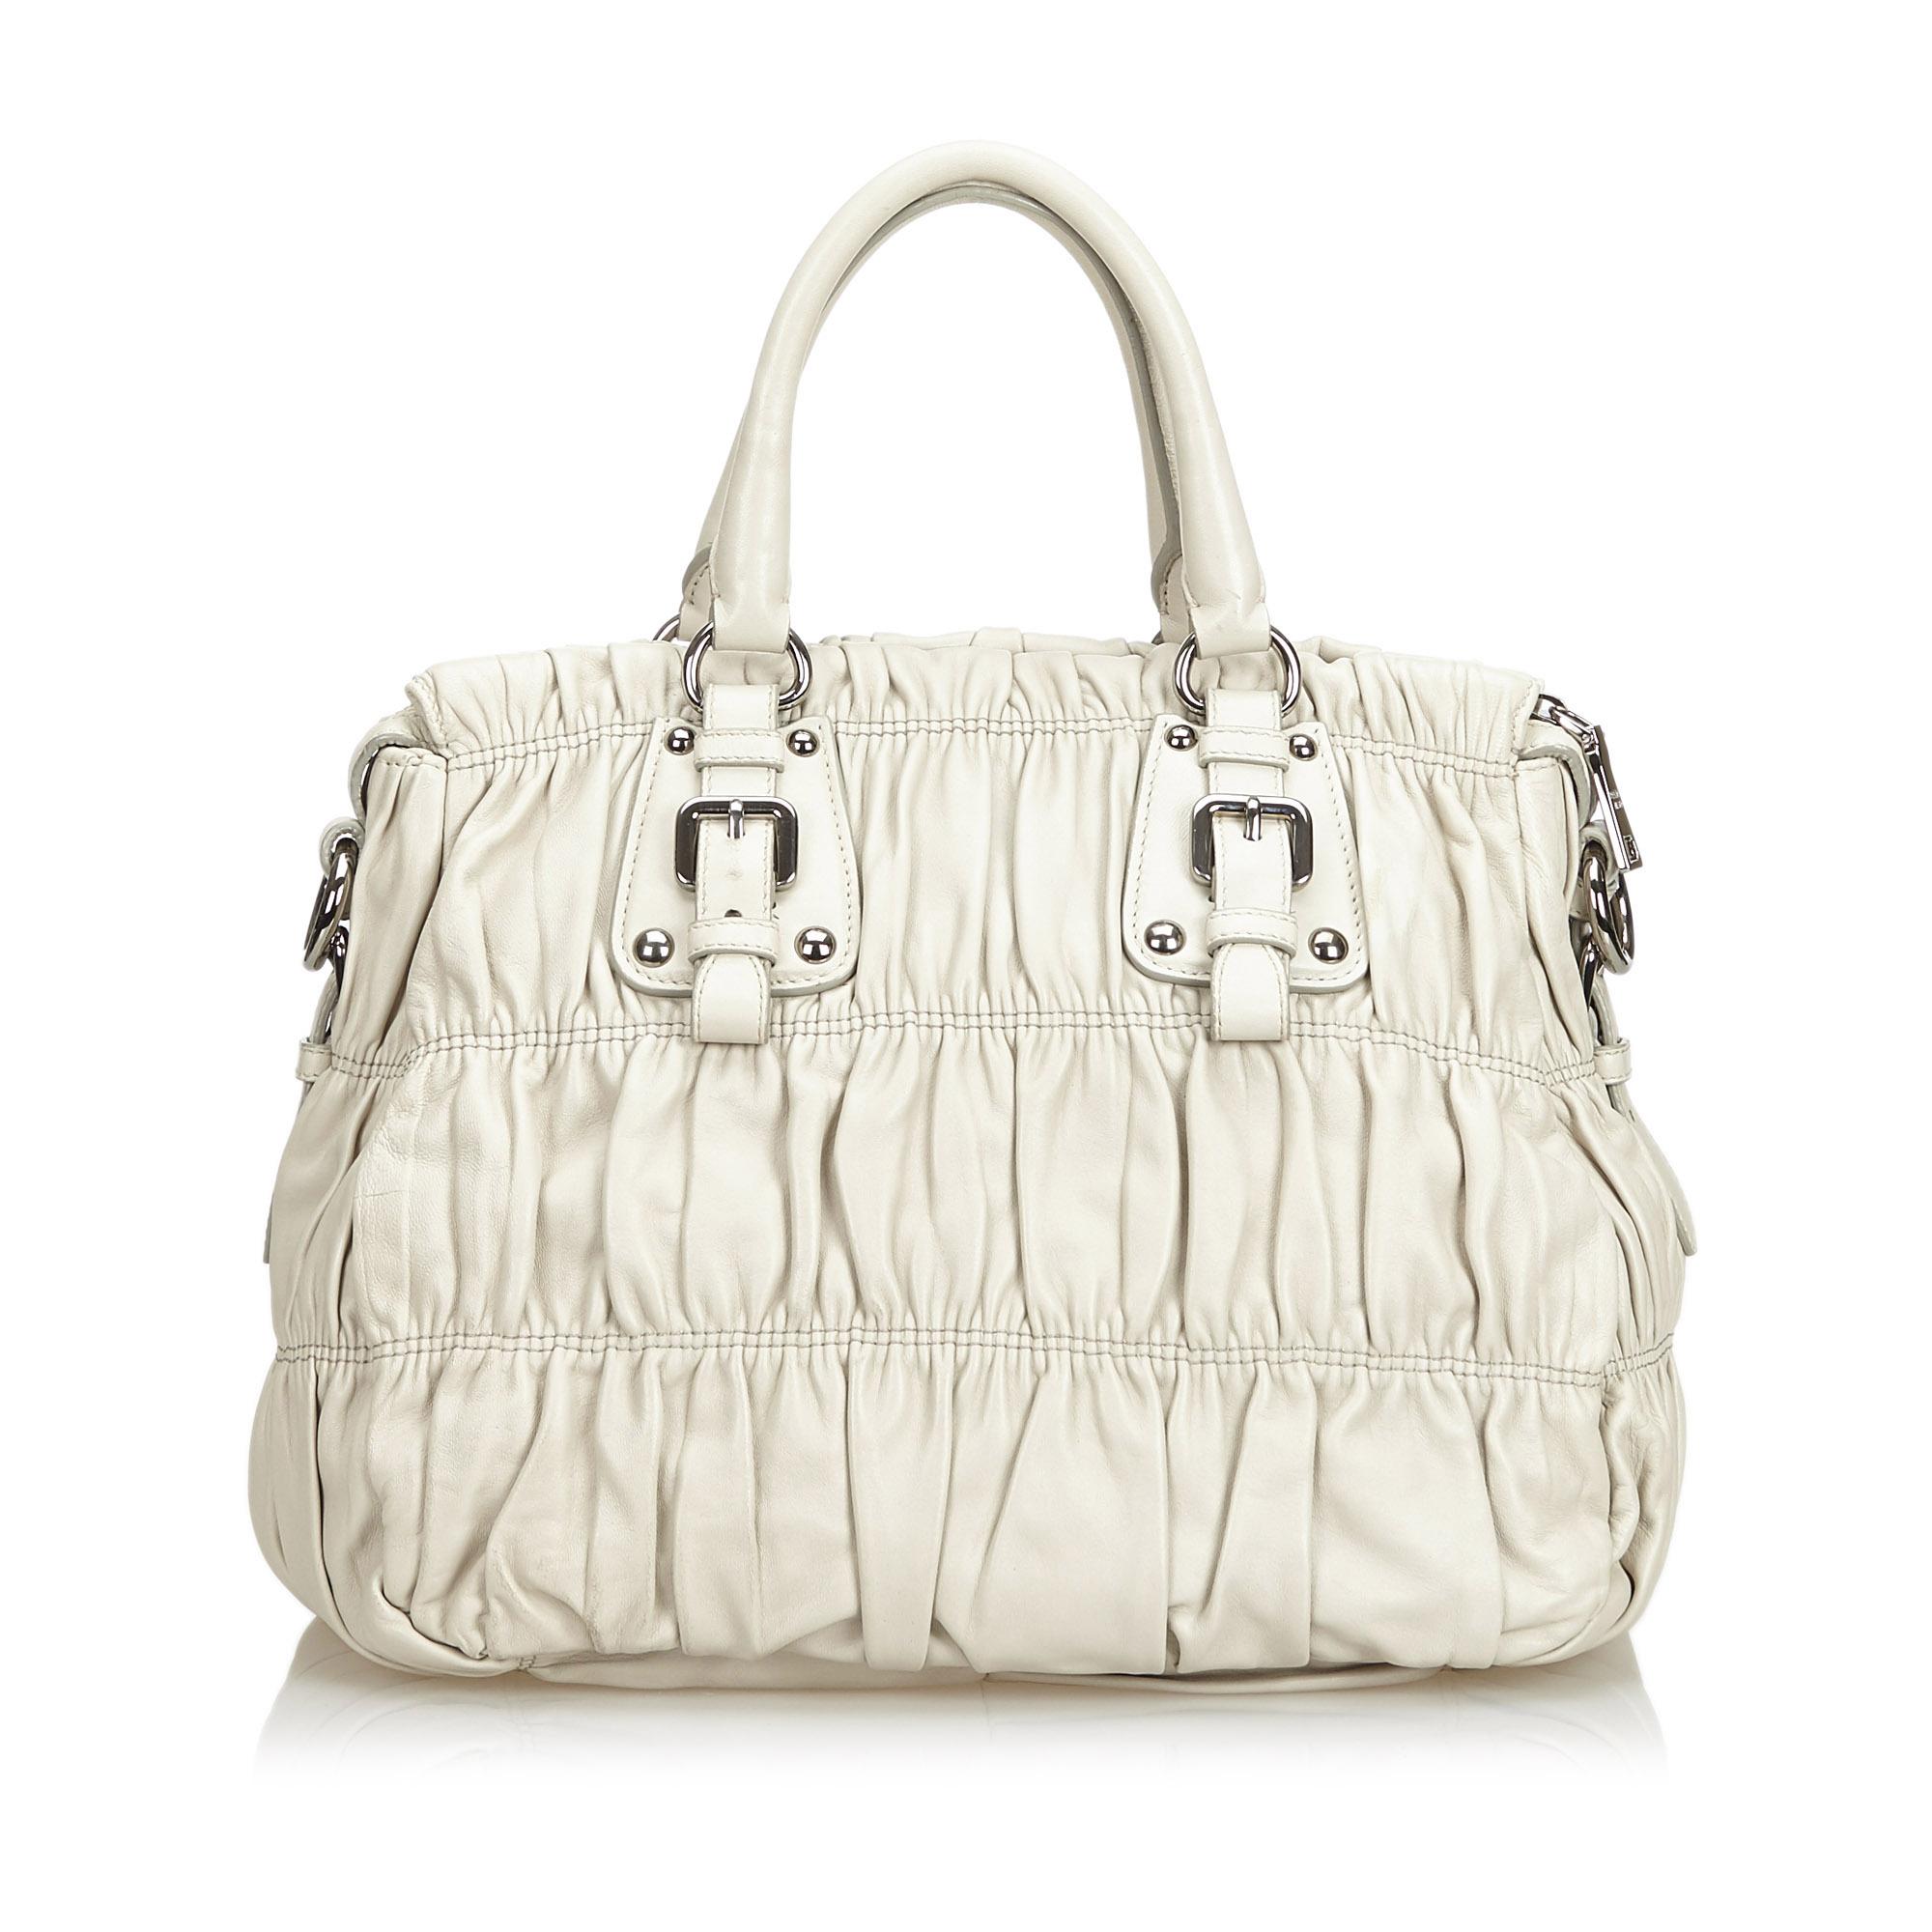 Vintage Authentic Prada White Ivory Leather Gathered Satchel Italy MEDIUM  In Good Condition For Sale In Orlando, FL